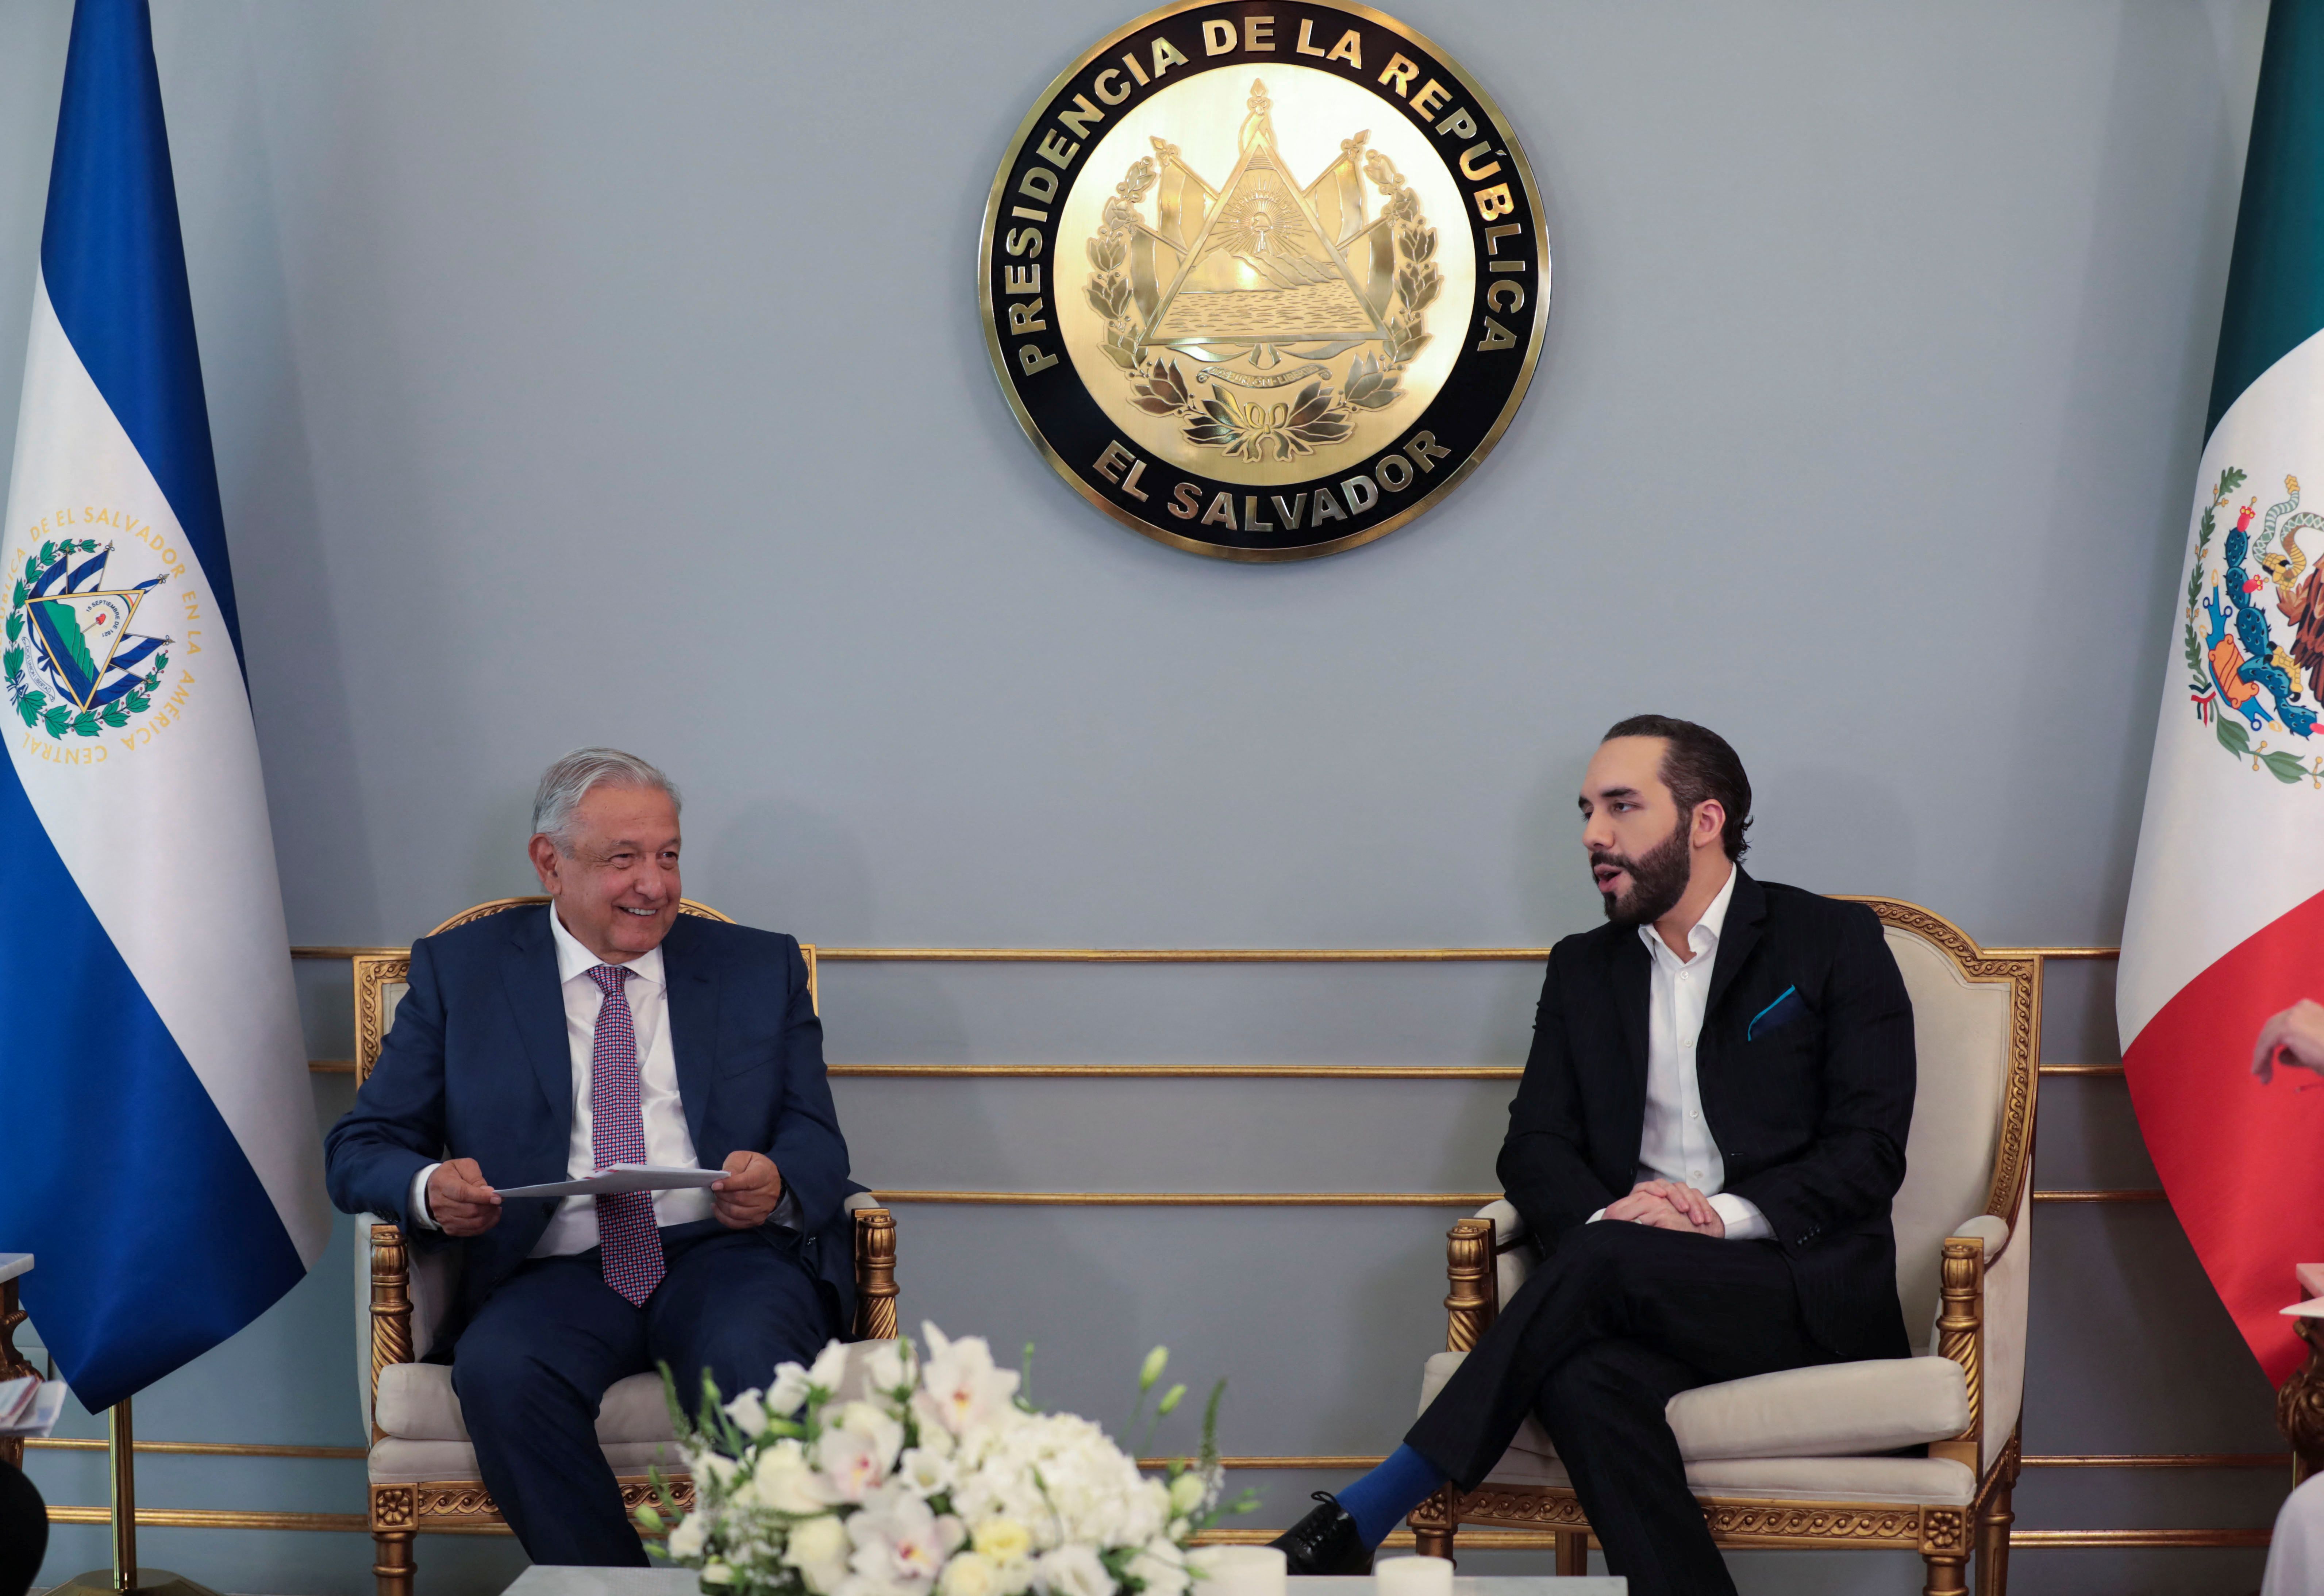 The President of Mexico, Andrés Manuel López Obrador, speaks with the President of El Salvador, Nayib Bukele, during a private meeting at the Presidential House, during Obrador's visit to San Salvador, El Salvador.